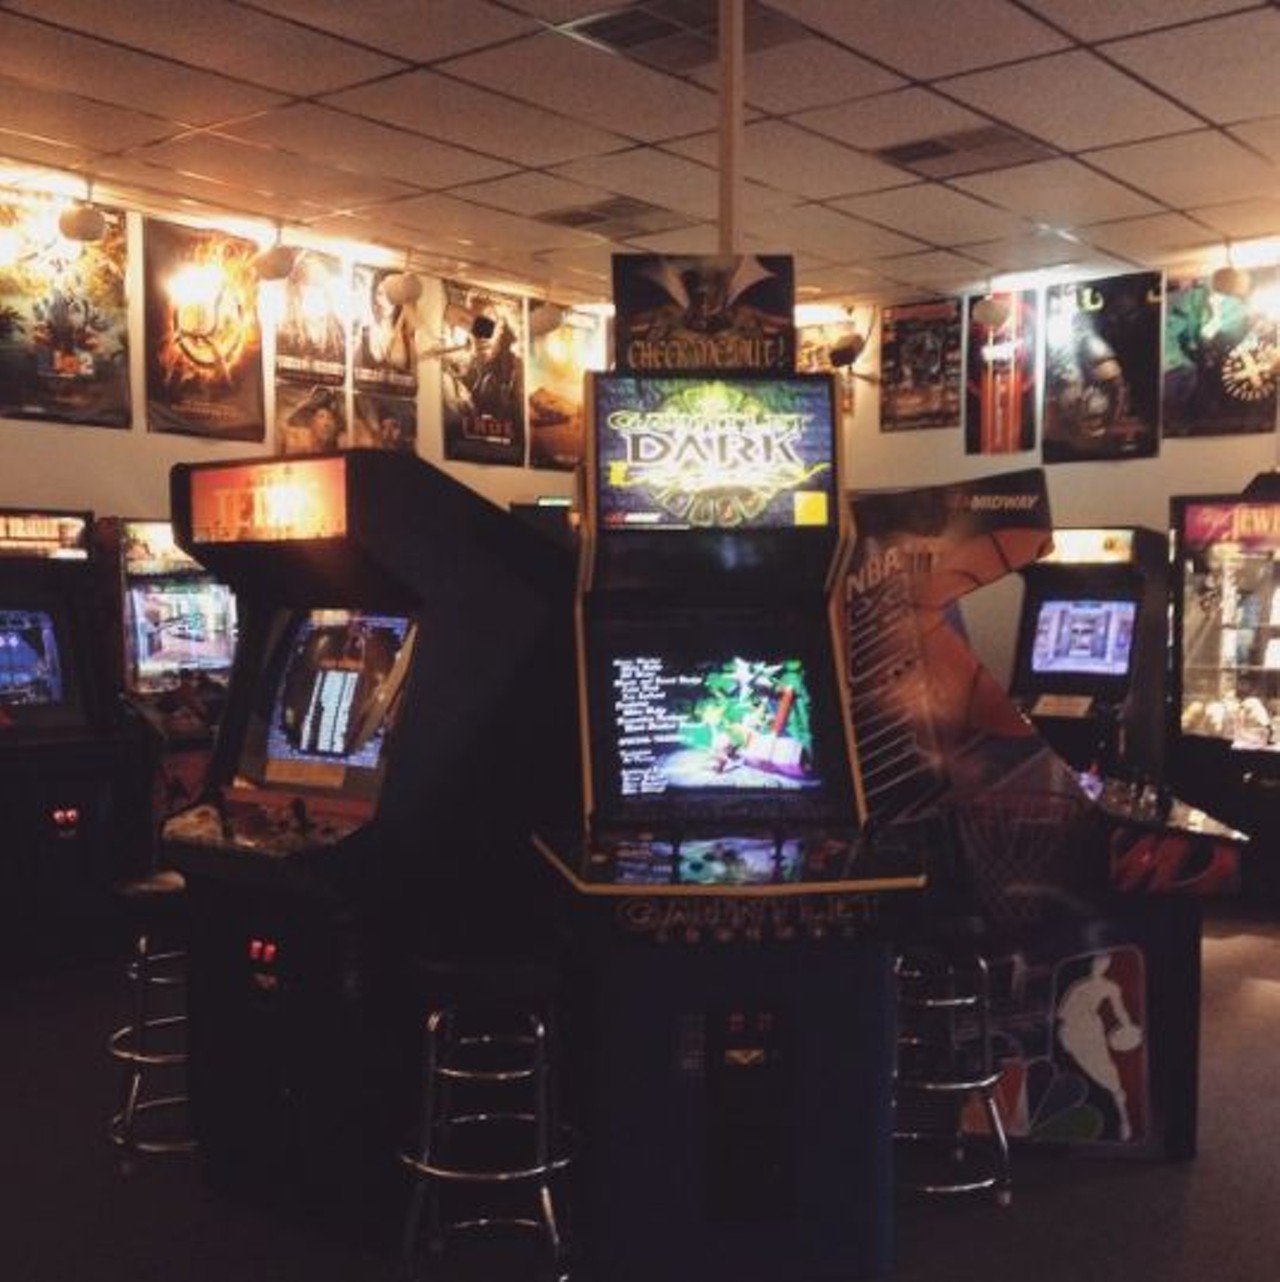 Play games at an arcade 
Unleash your inner child and play pinball and other old-timey games at a local arcade. Dave & Buster&#146;s is always a convenient spot, but if you&#146;re looking for something more affordable and local, try the Diversions Game Room on San Pedro.  
Photo via Instagram, okbye42069